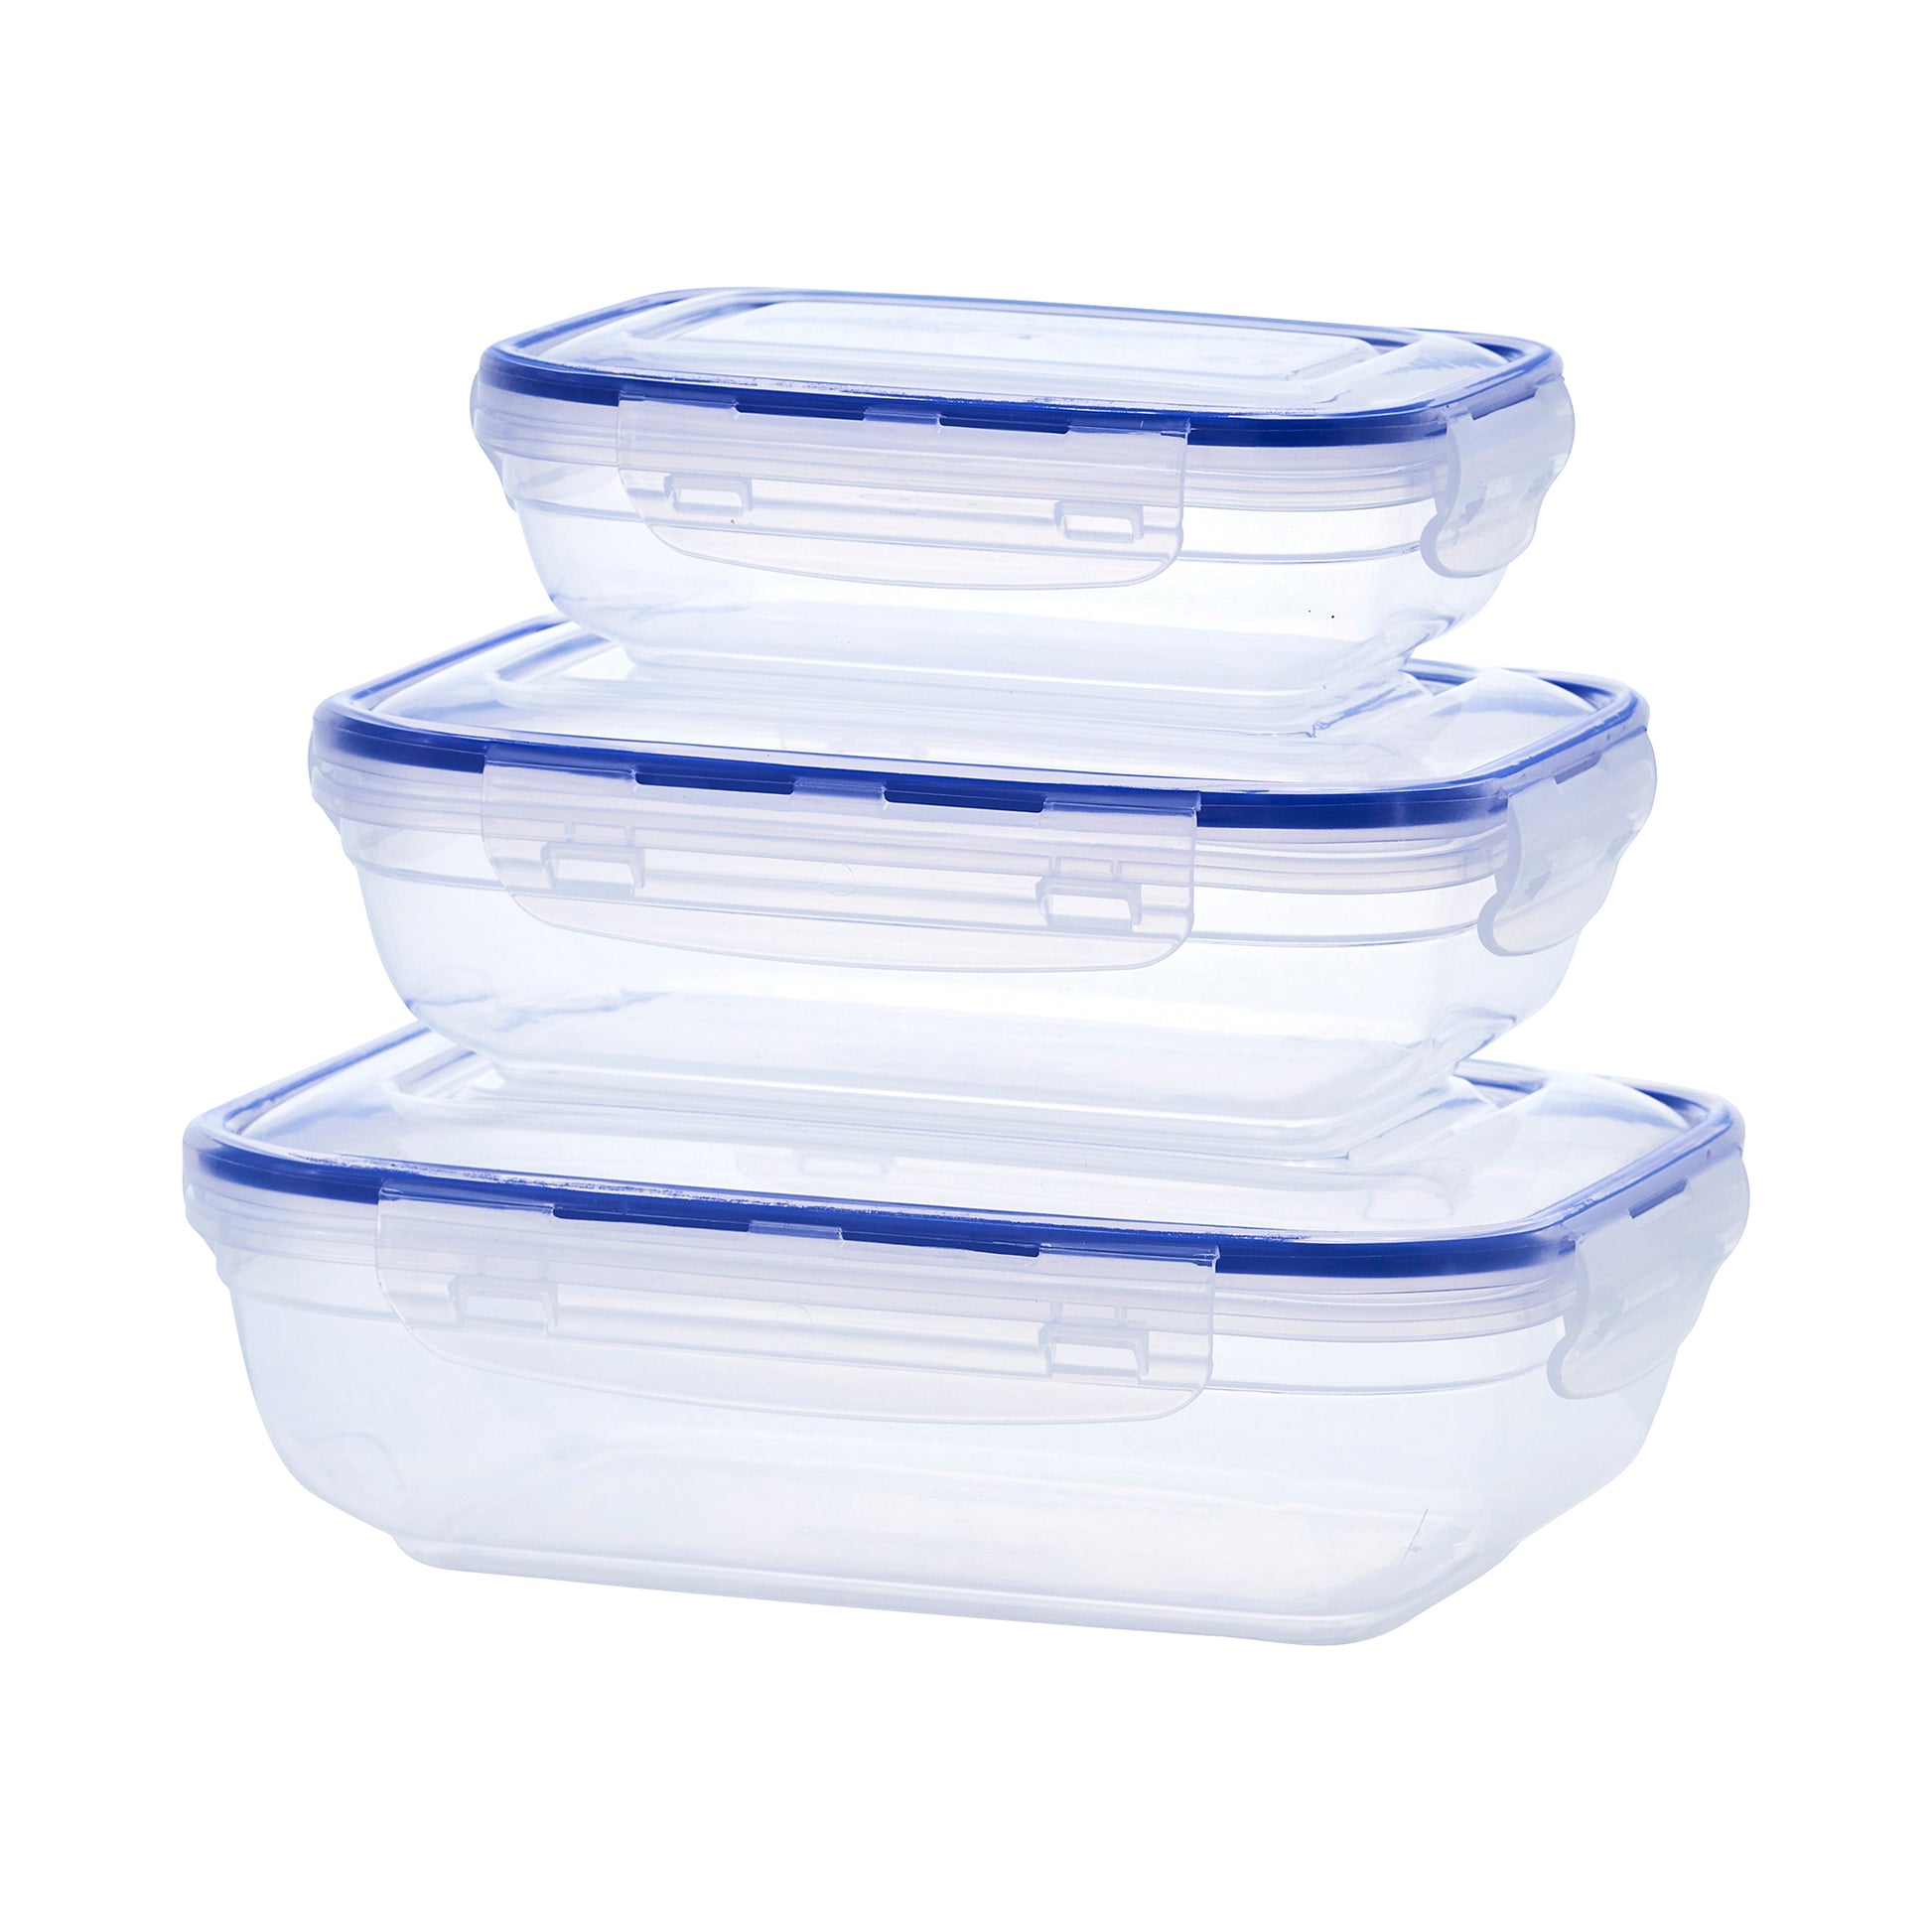 [1 Pack] Meal Prep Containers with Lids - Reusable Glass Food Prep  Containers - 3 Compartment